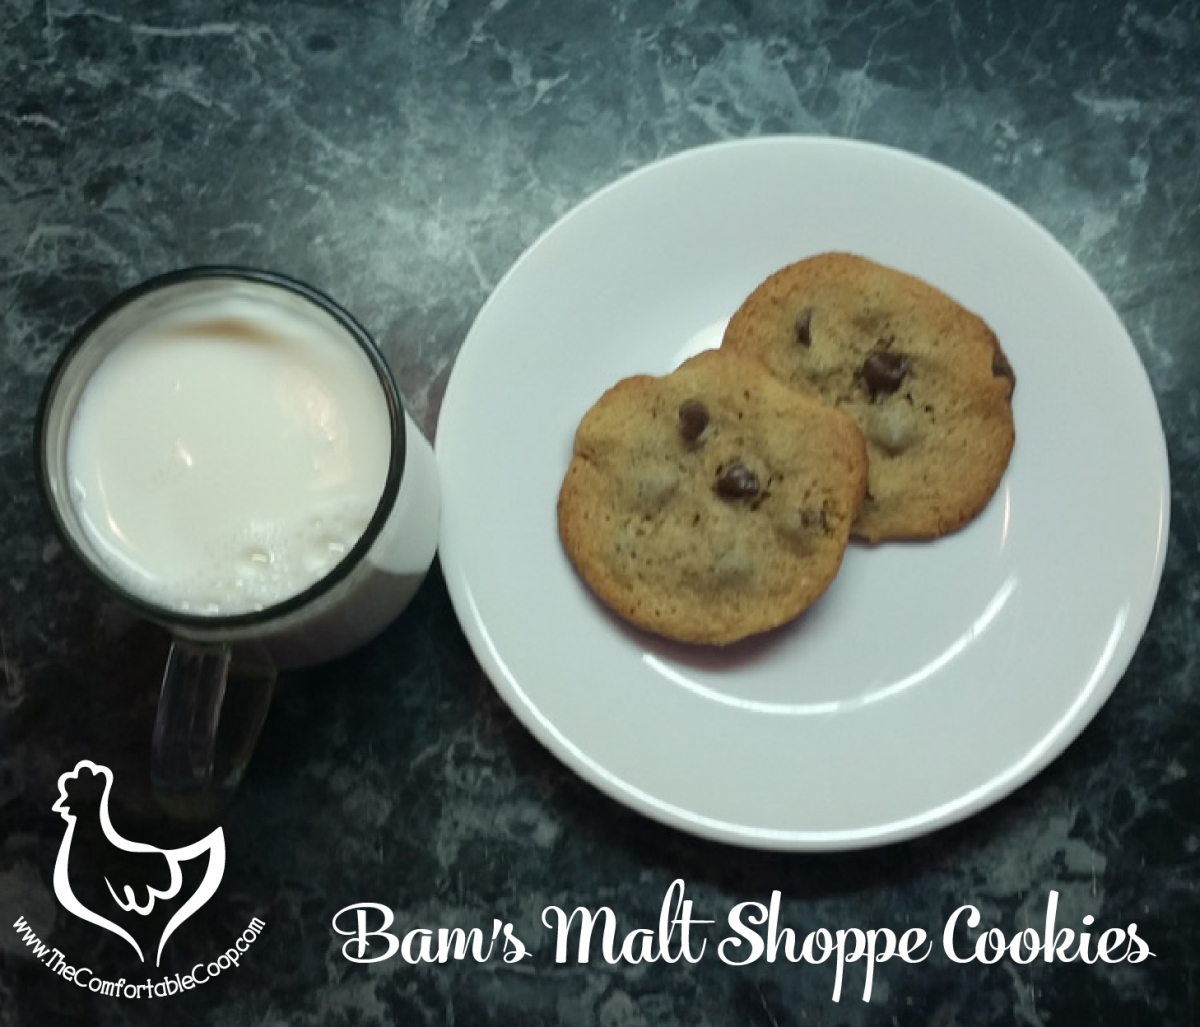 These cookies are like a trip to an old-fashioned malt shoppe!